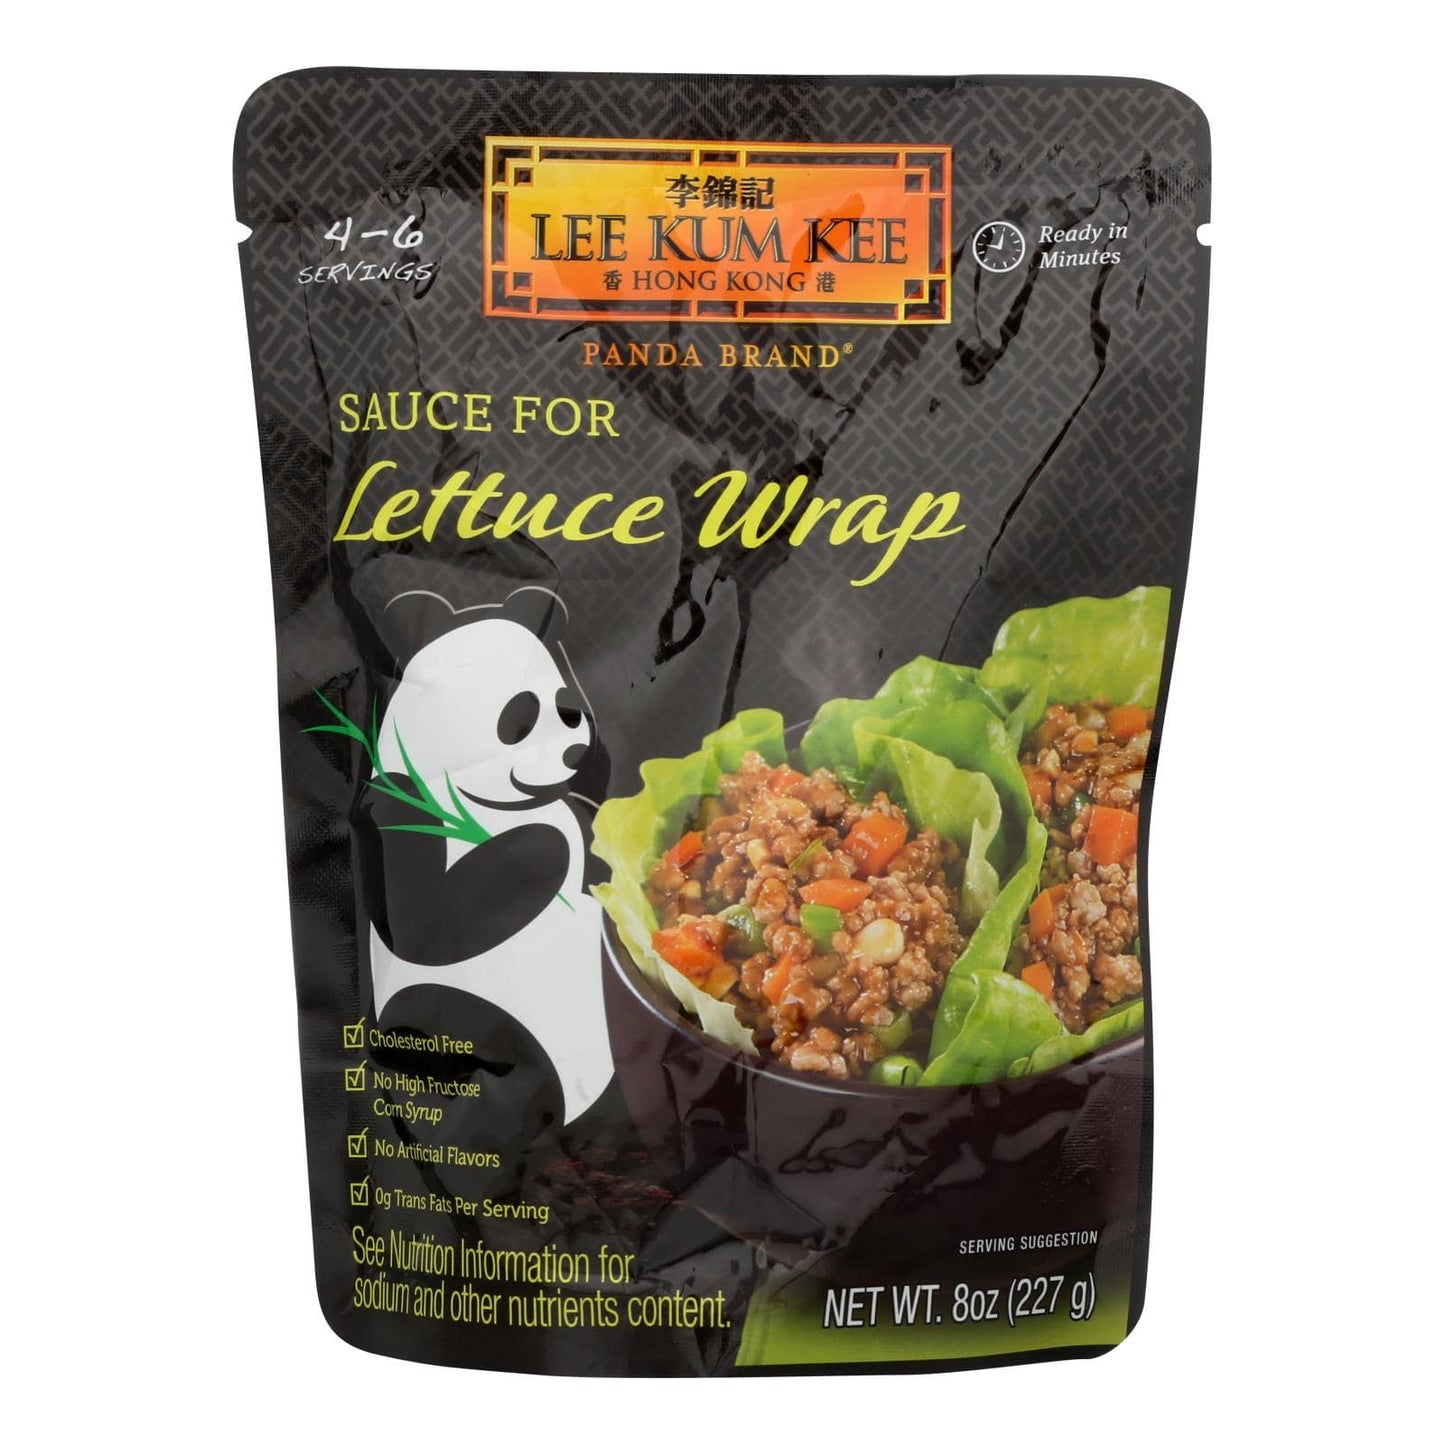 Buy Lee Kum Kee Sauce Pandra Brand Sauce For Lettuce Wrap - 8 Oz - Case Of 6  at OnlyNaturals.us